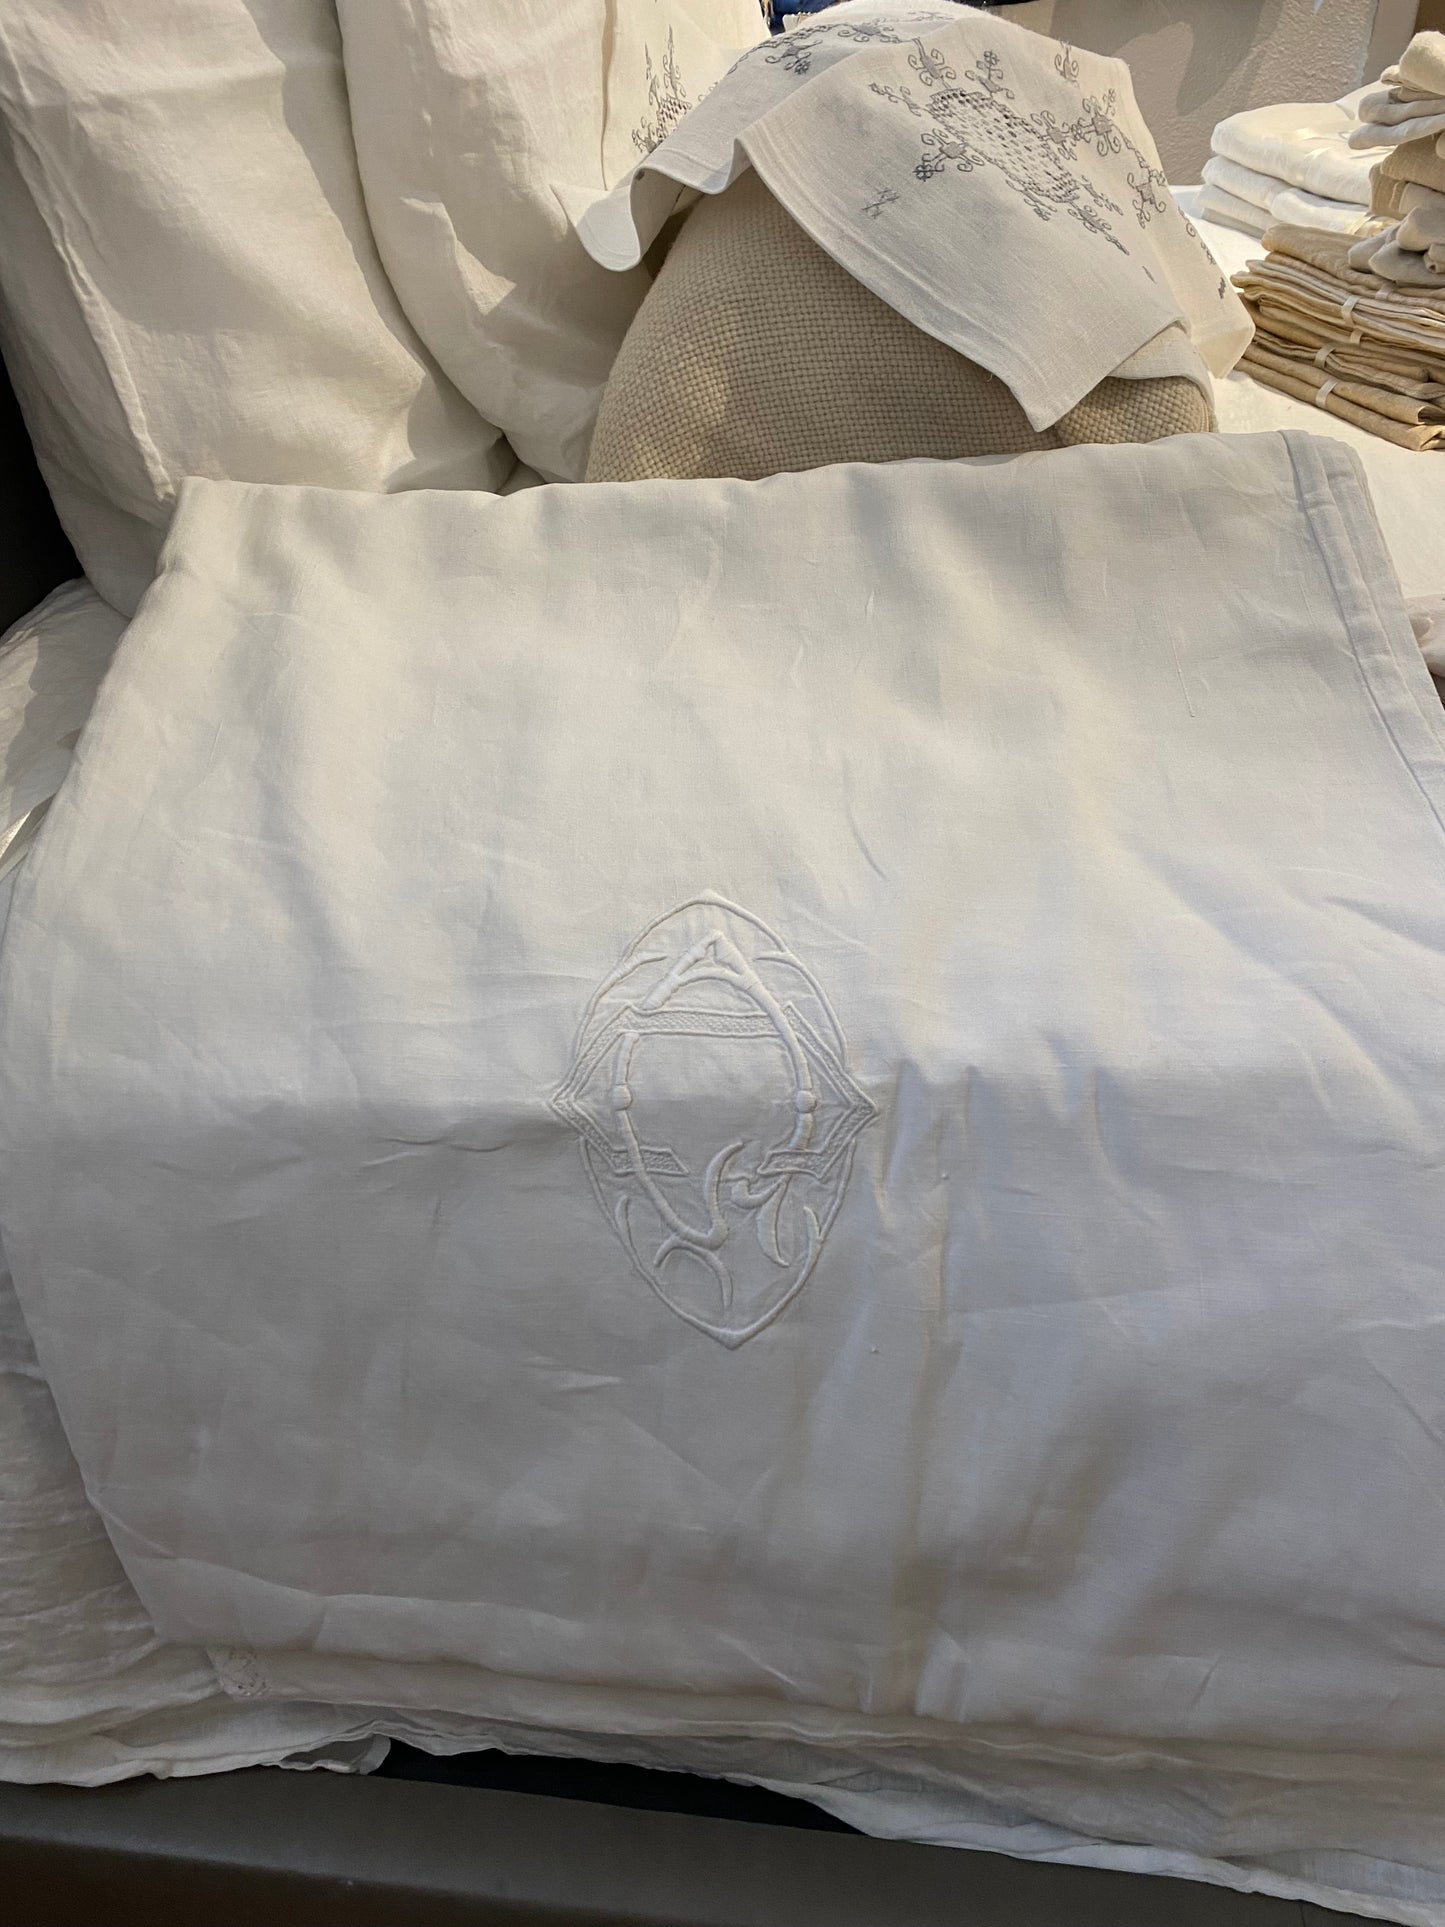 Linen Duvet with Oval Shaped Embroidery